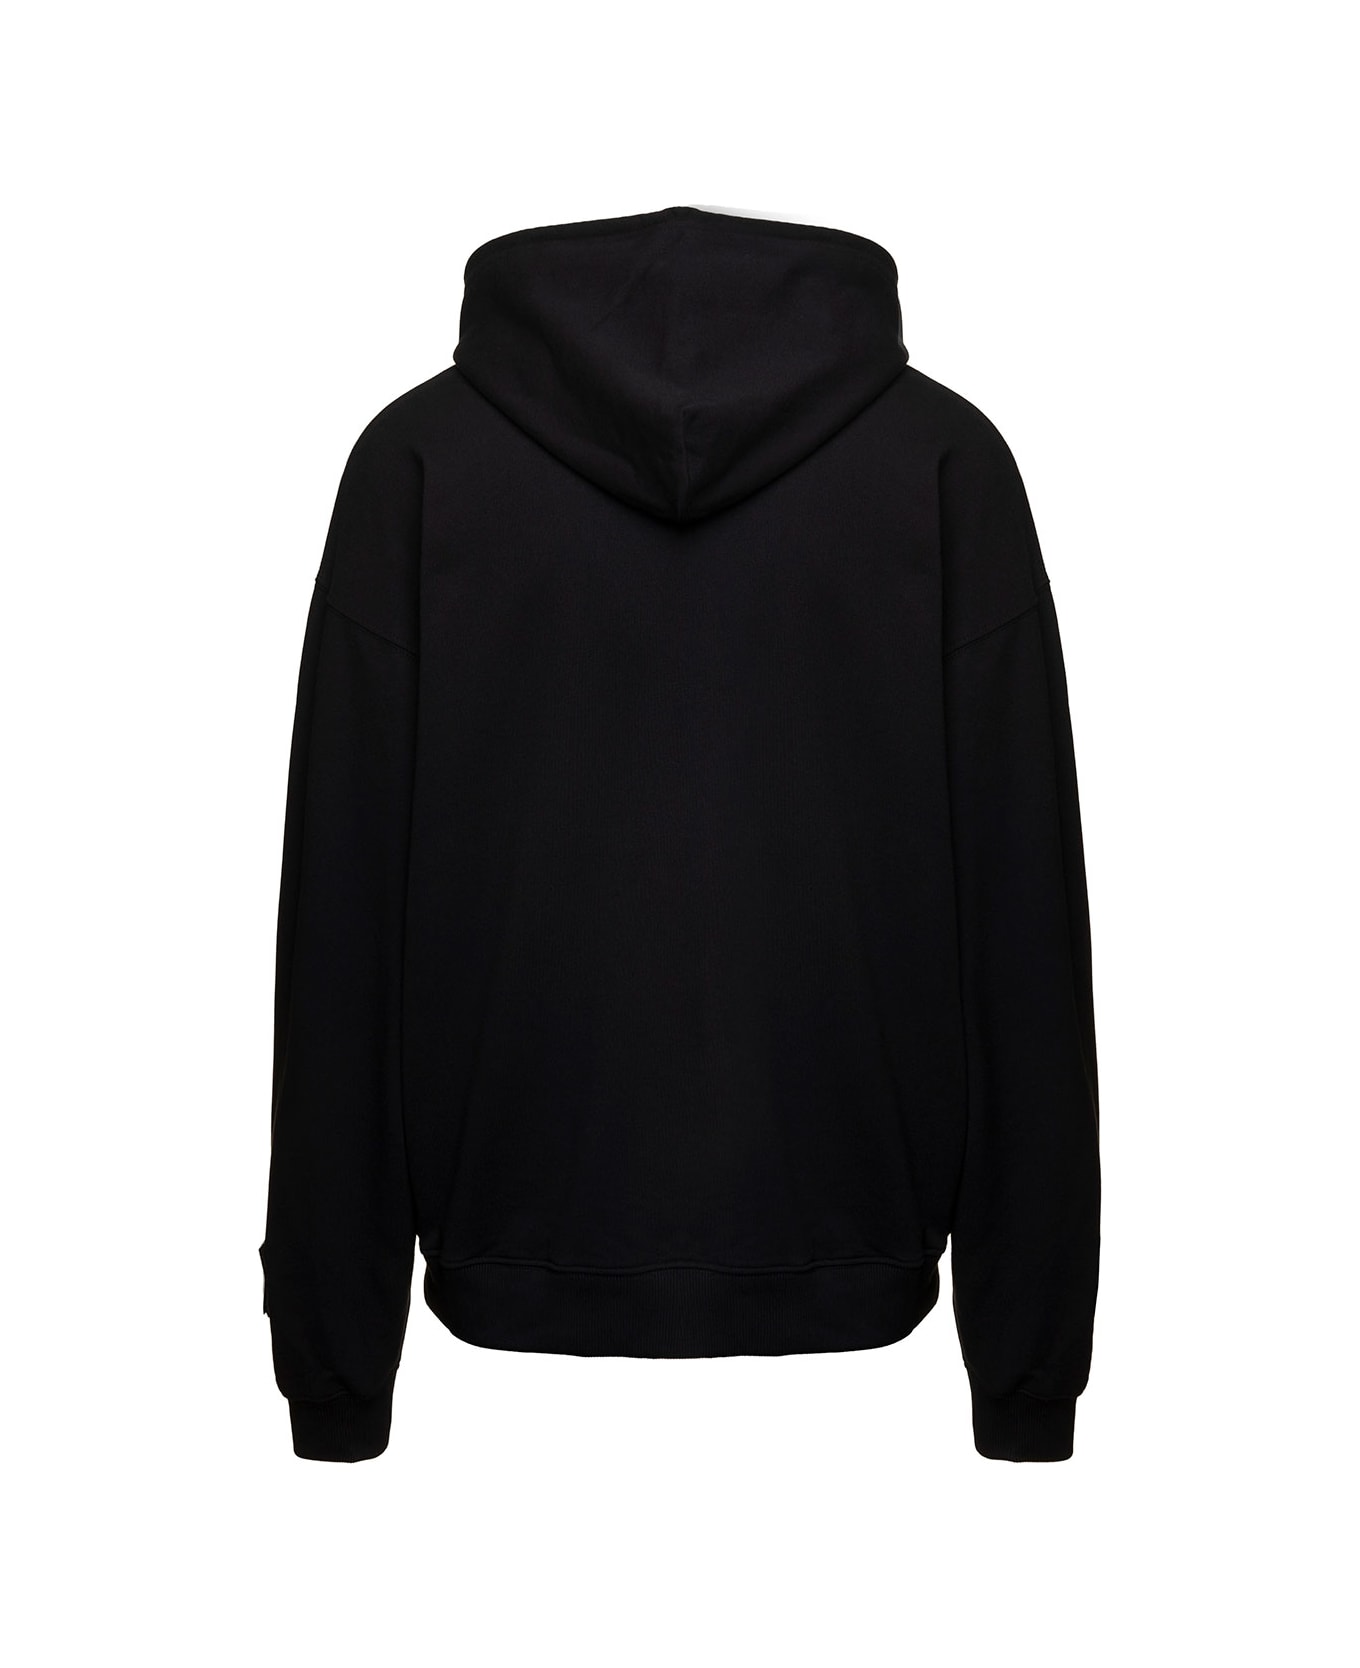 44 Label Group Black Hoodie With Contrasting Logo Embroidery In Cotton Man - Black フリース